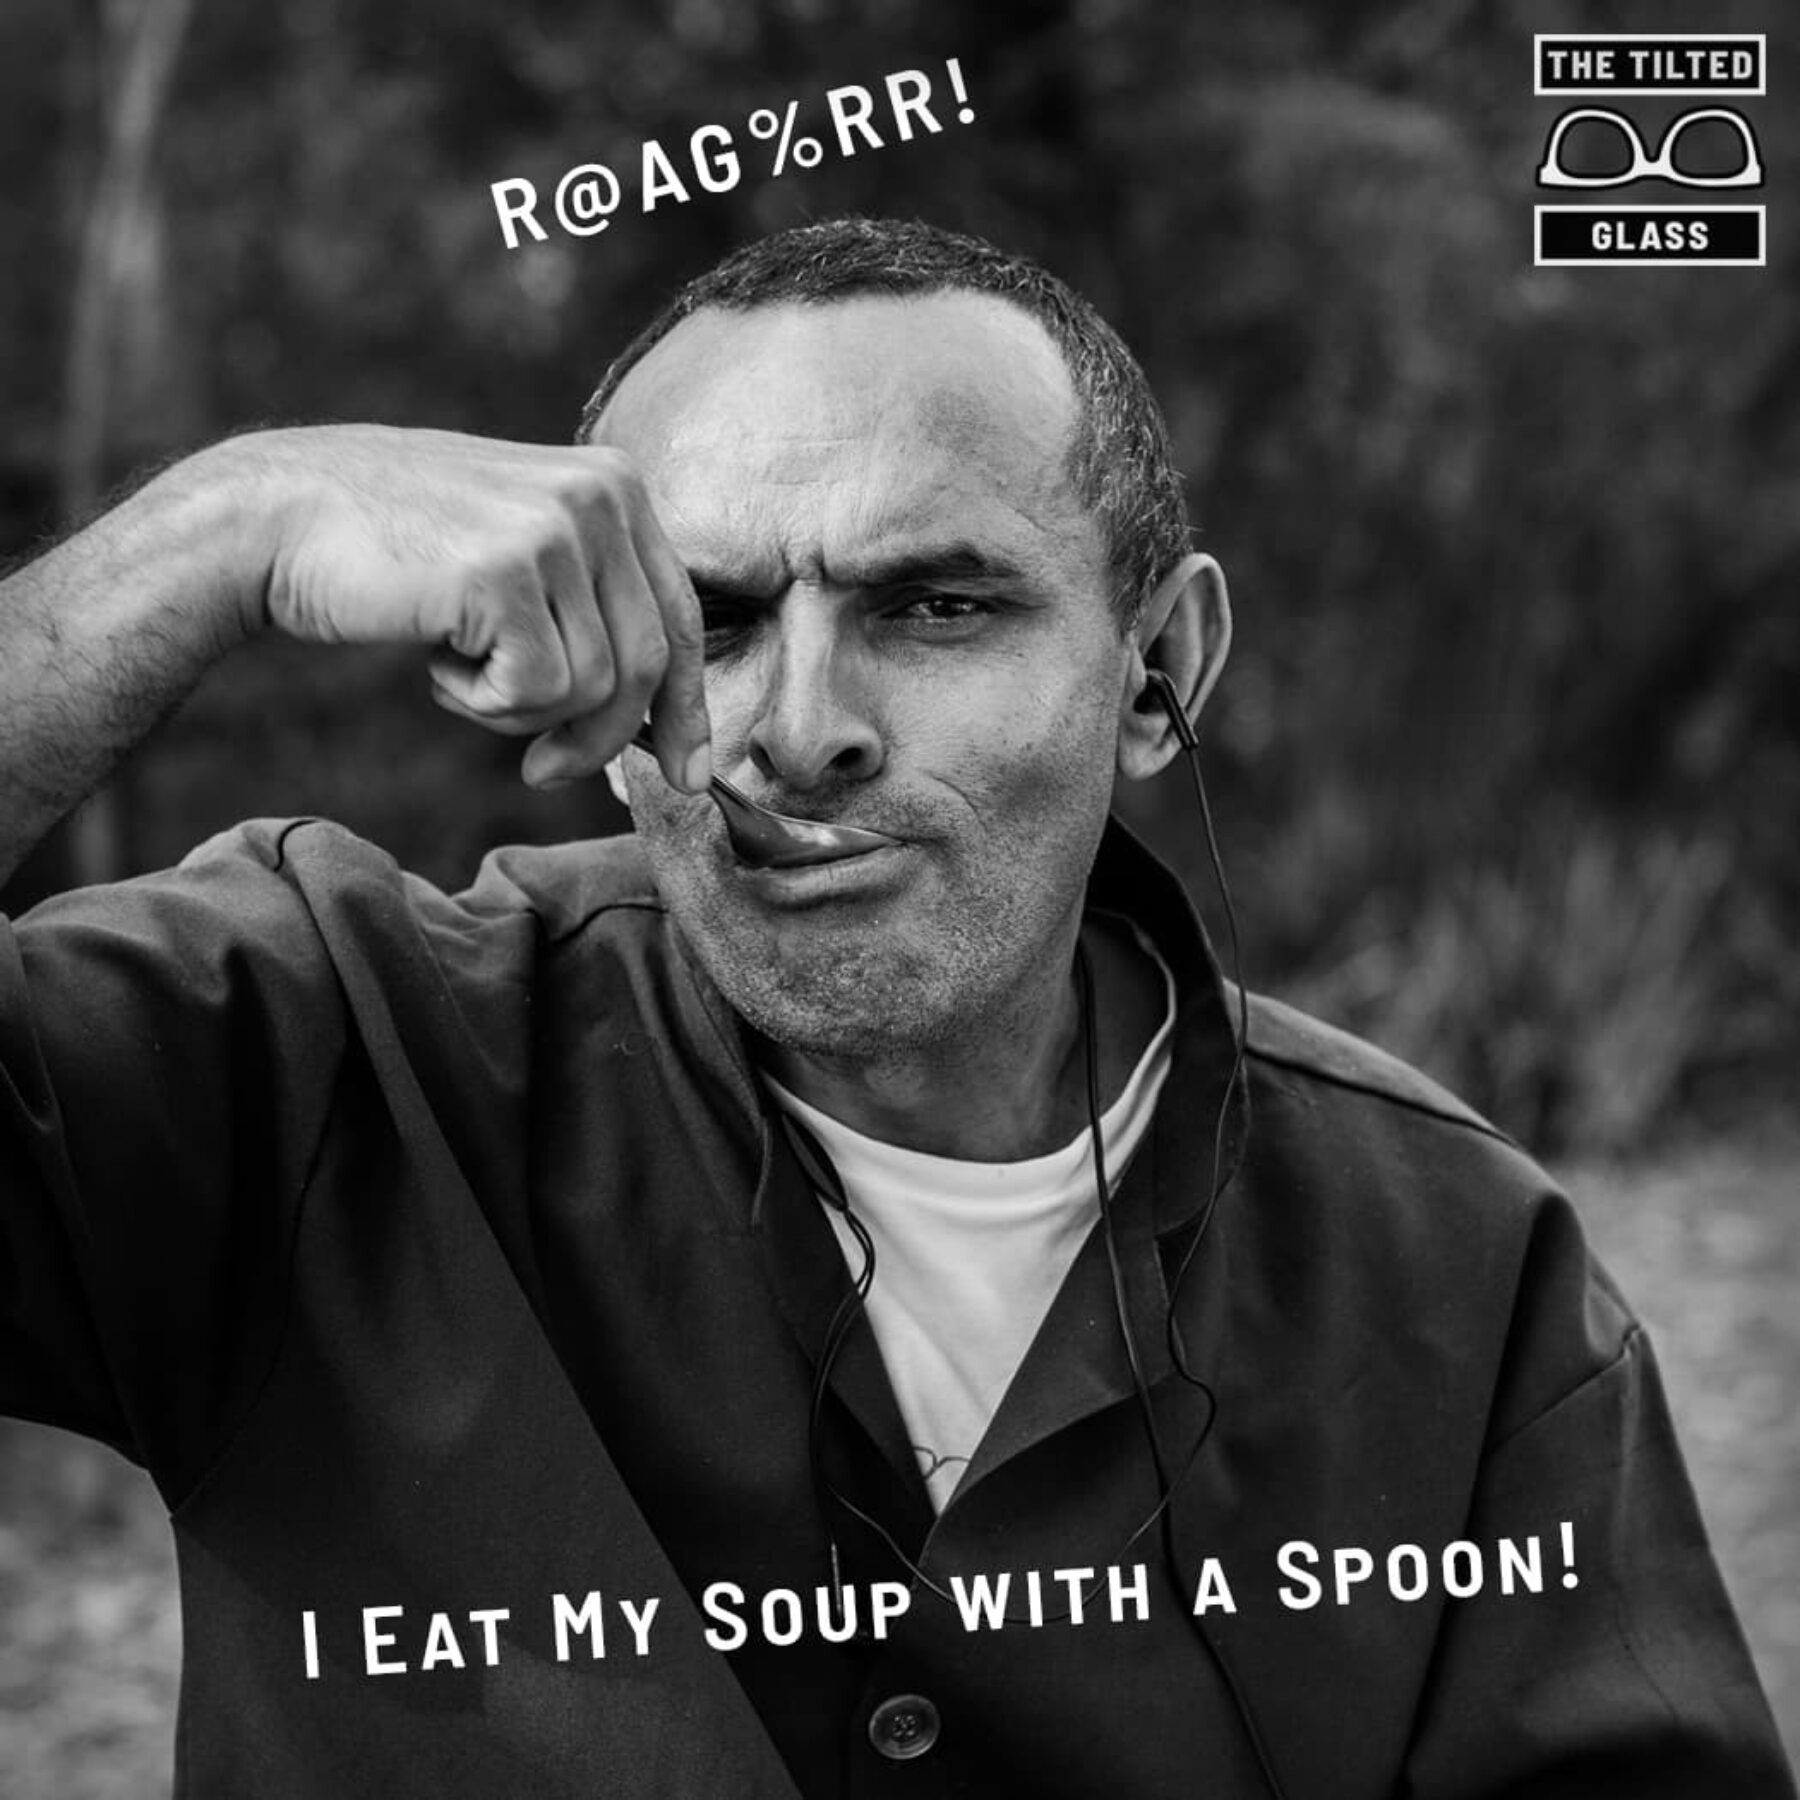 R@AG%RR!  I eat my soup with a spoon!